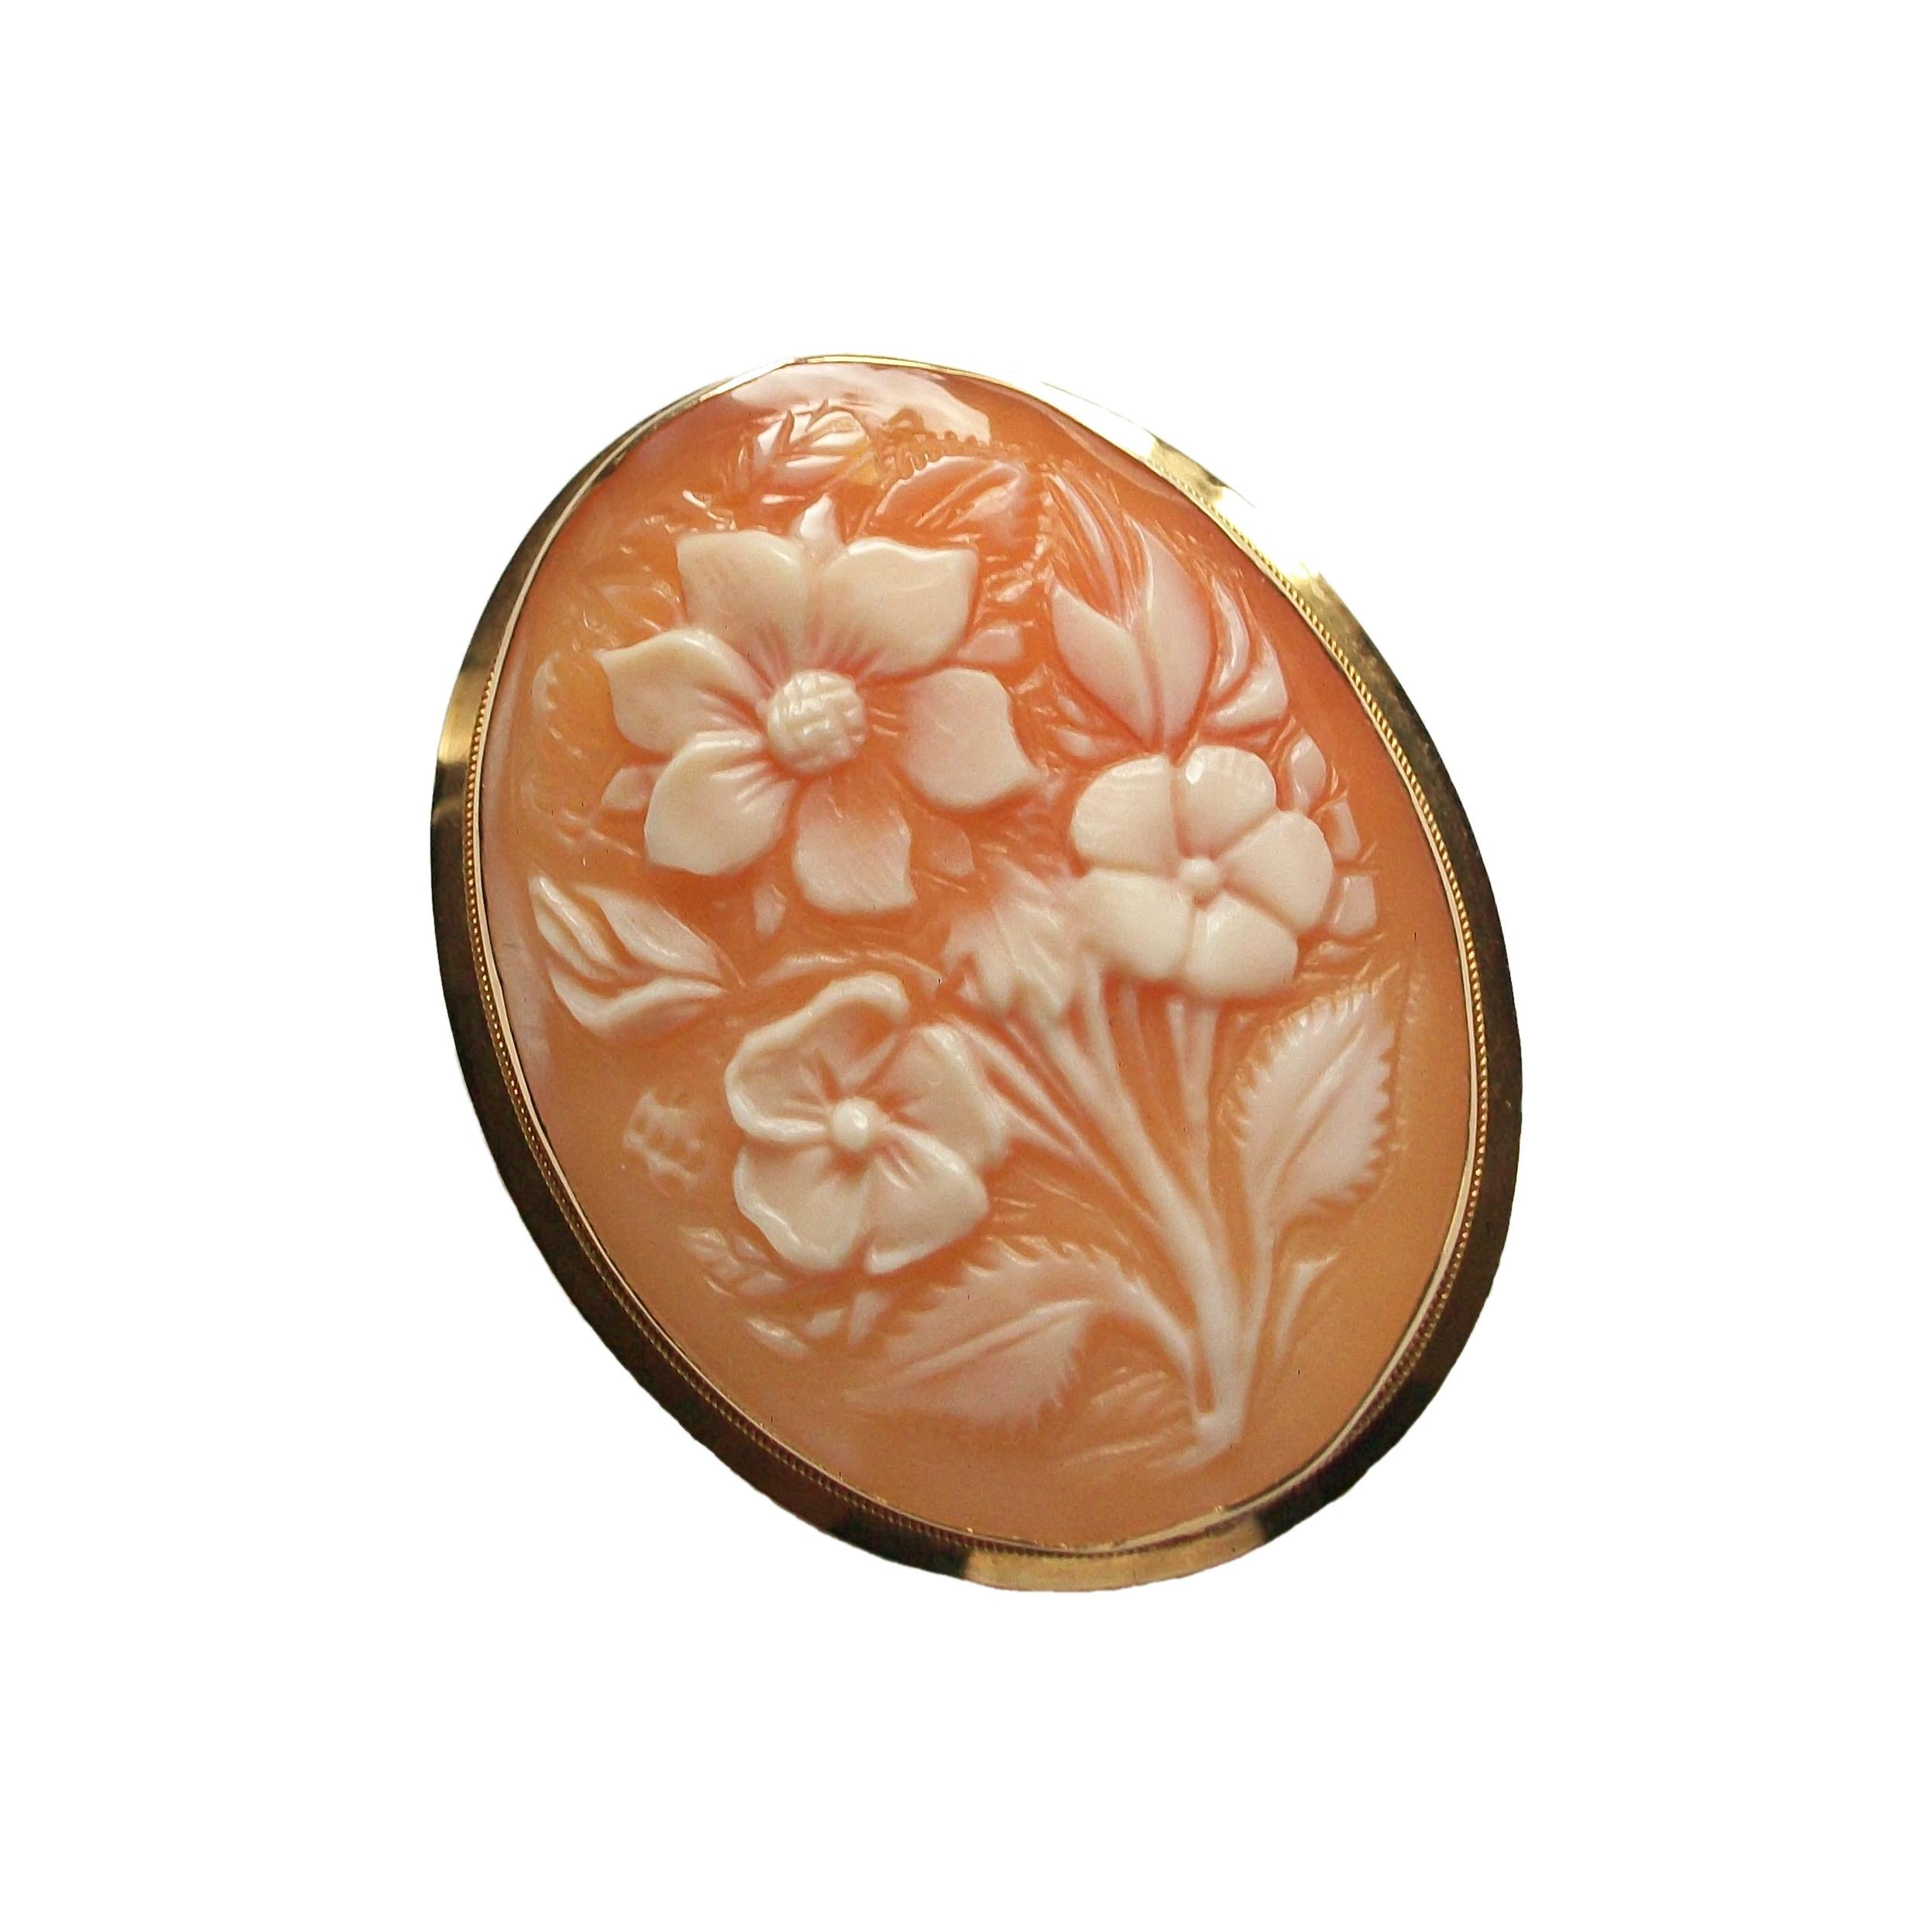 Vintage Naples floral shell cameo pendant or brooch - 18K/750 yellow gold frame, pin and bale - retractable bale to wear as a brooch - fine quality workmanship and detail - Italian hallmarks - Italy (Naples) - circa 1950's.

Excellent vintage